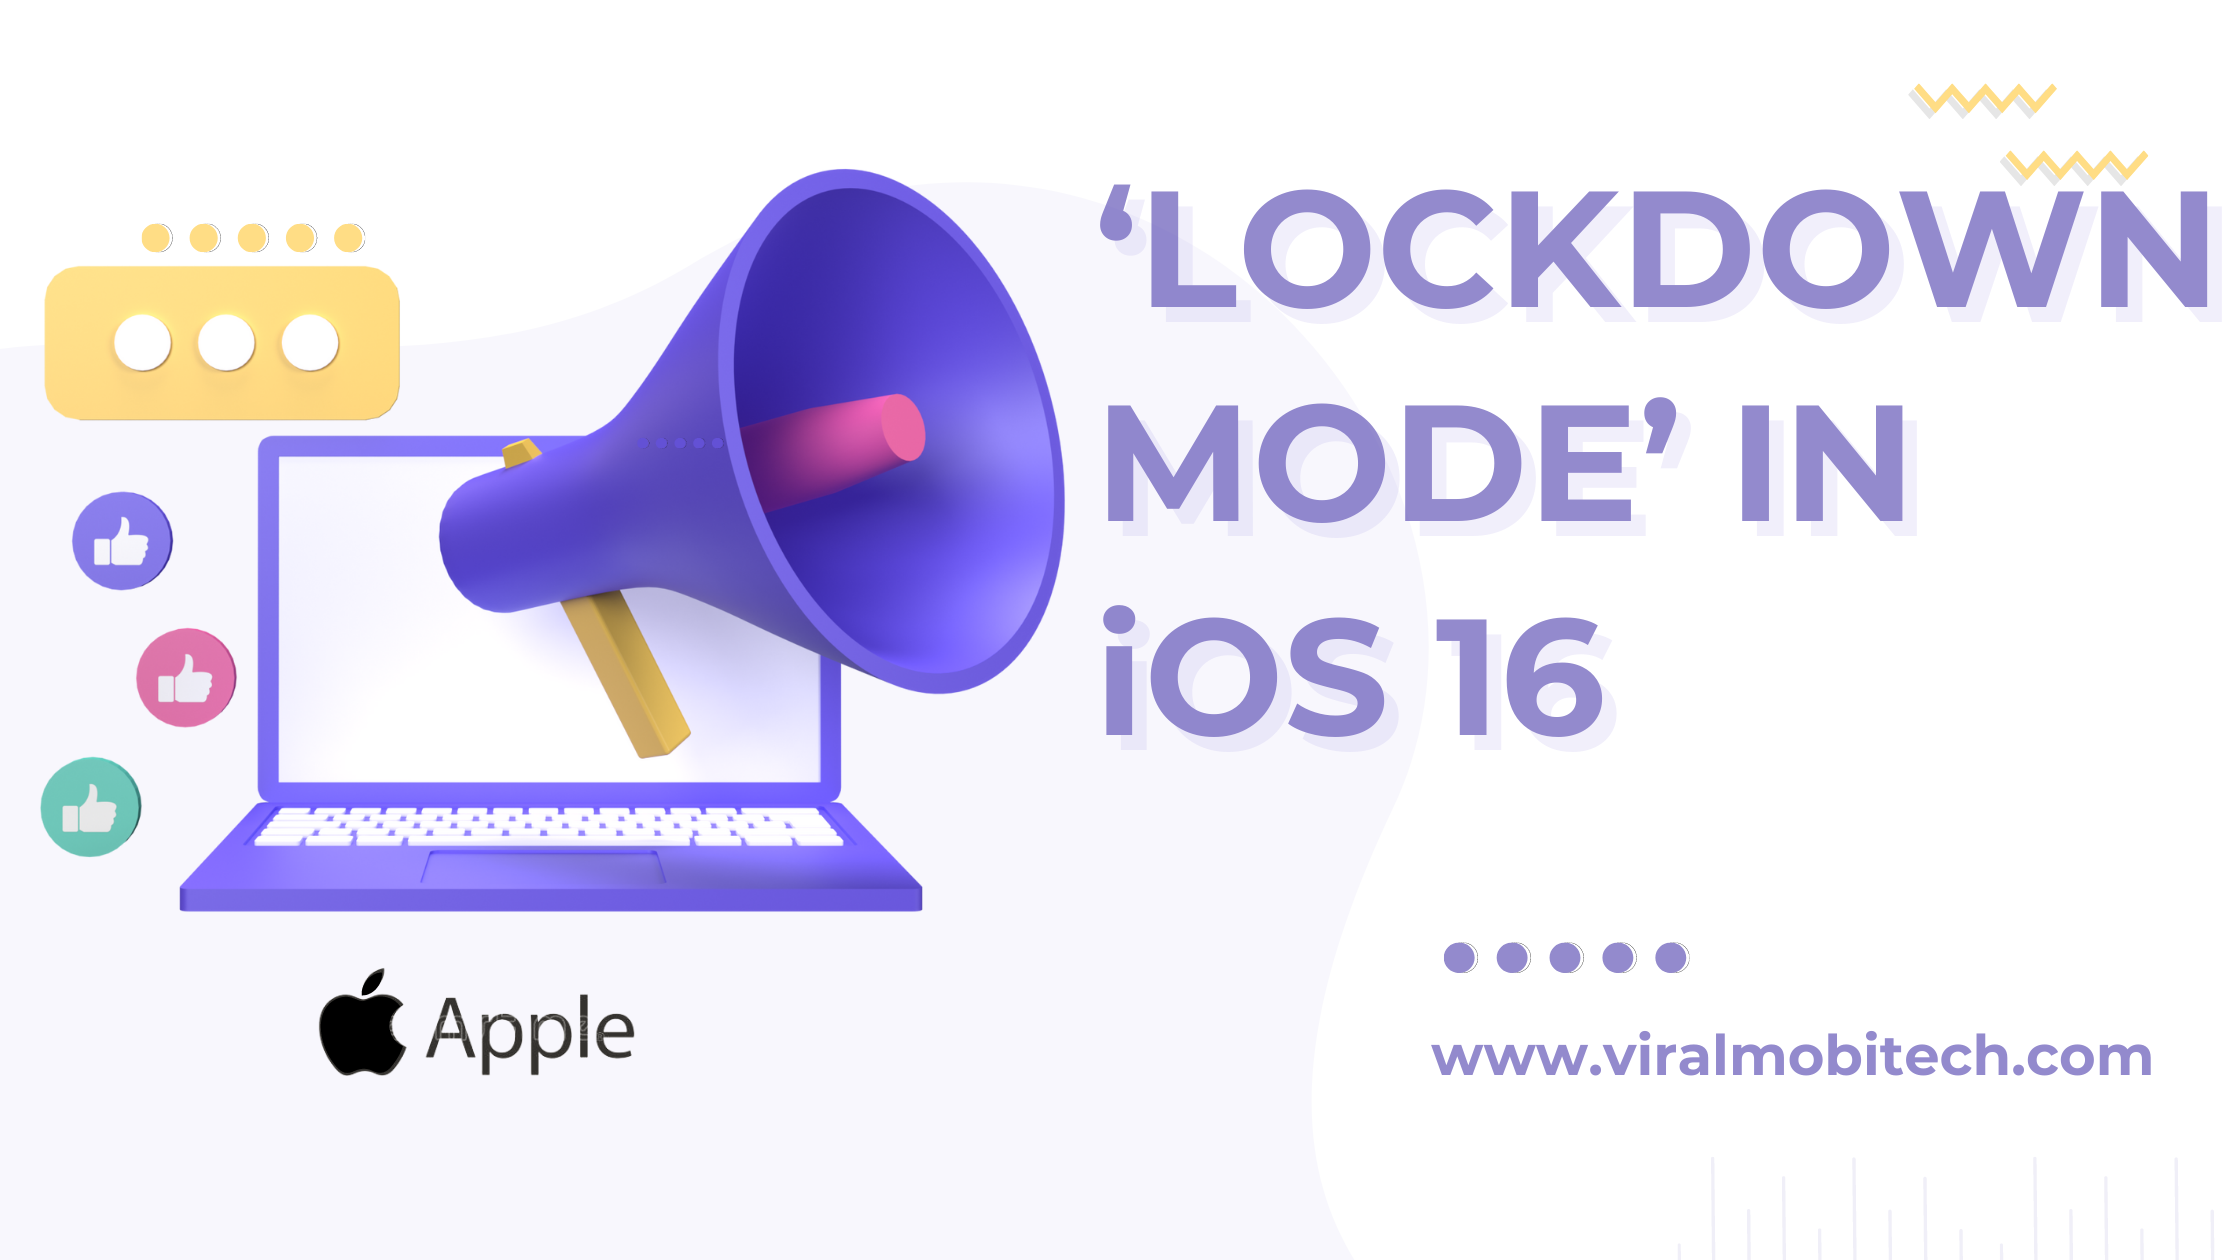 APPLE TO RELEASE NEW ‘LOCKDOWN MODE’ IN iOS 16 AS IT BATTLES SPYWARE FIRMS